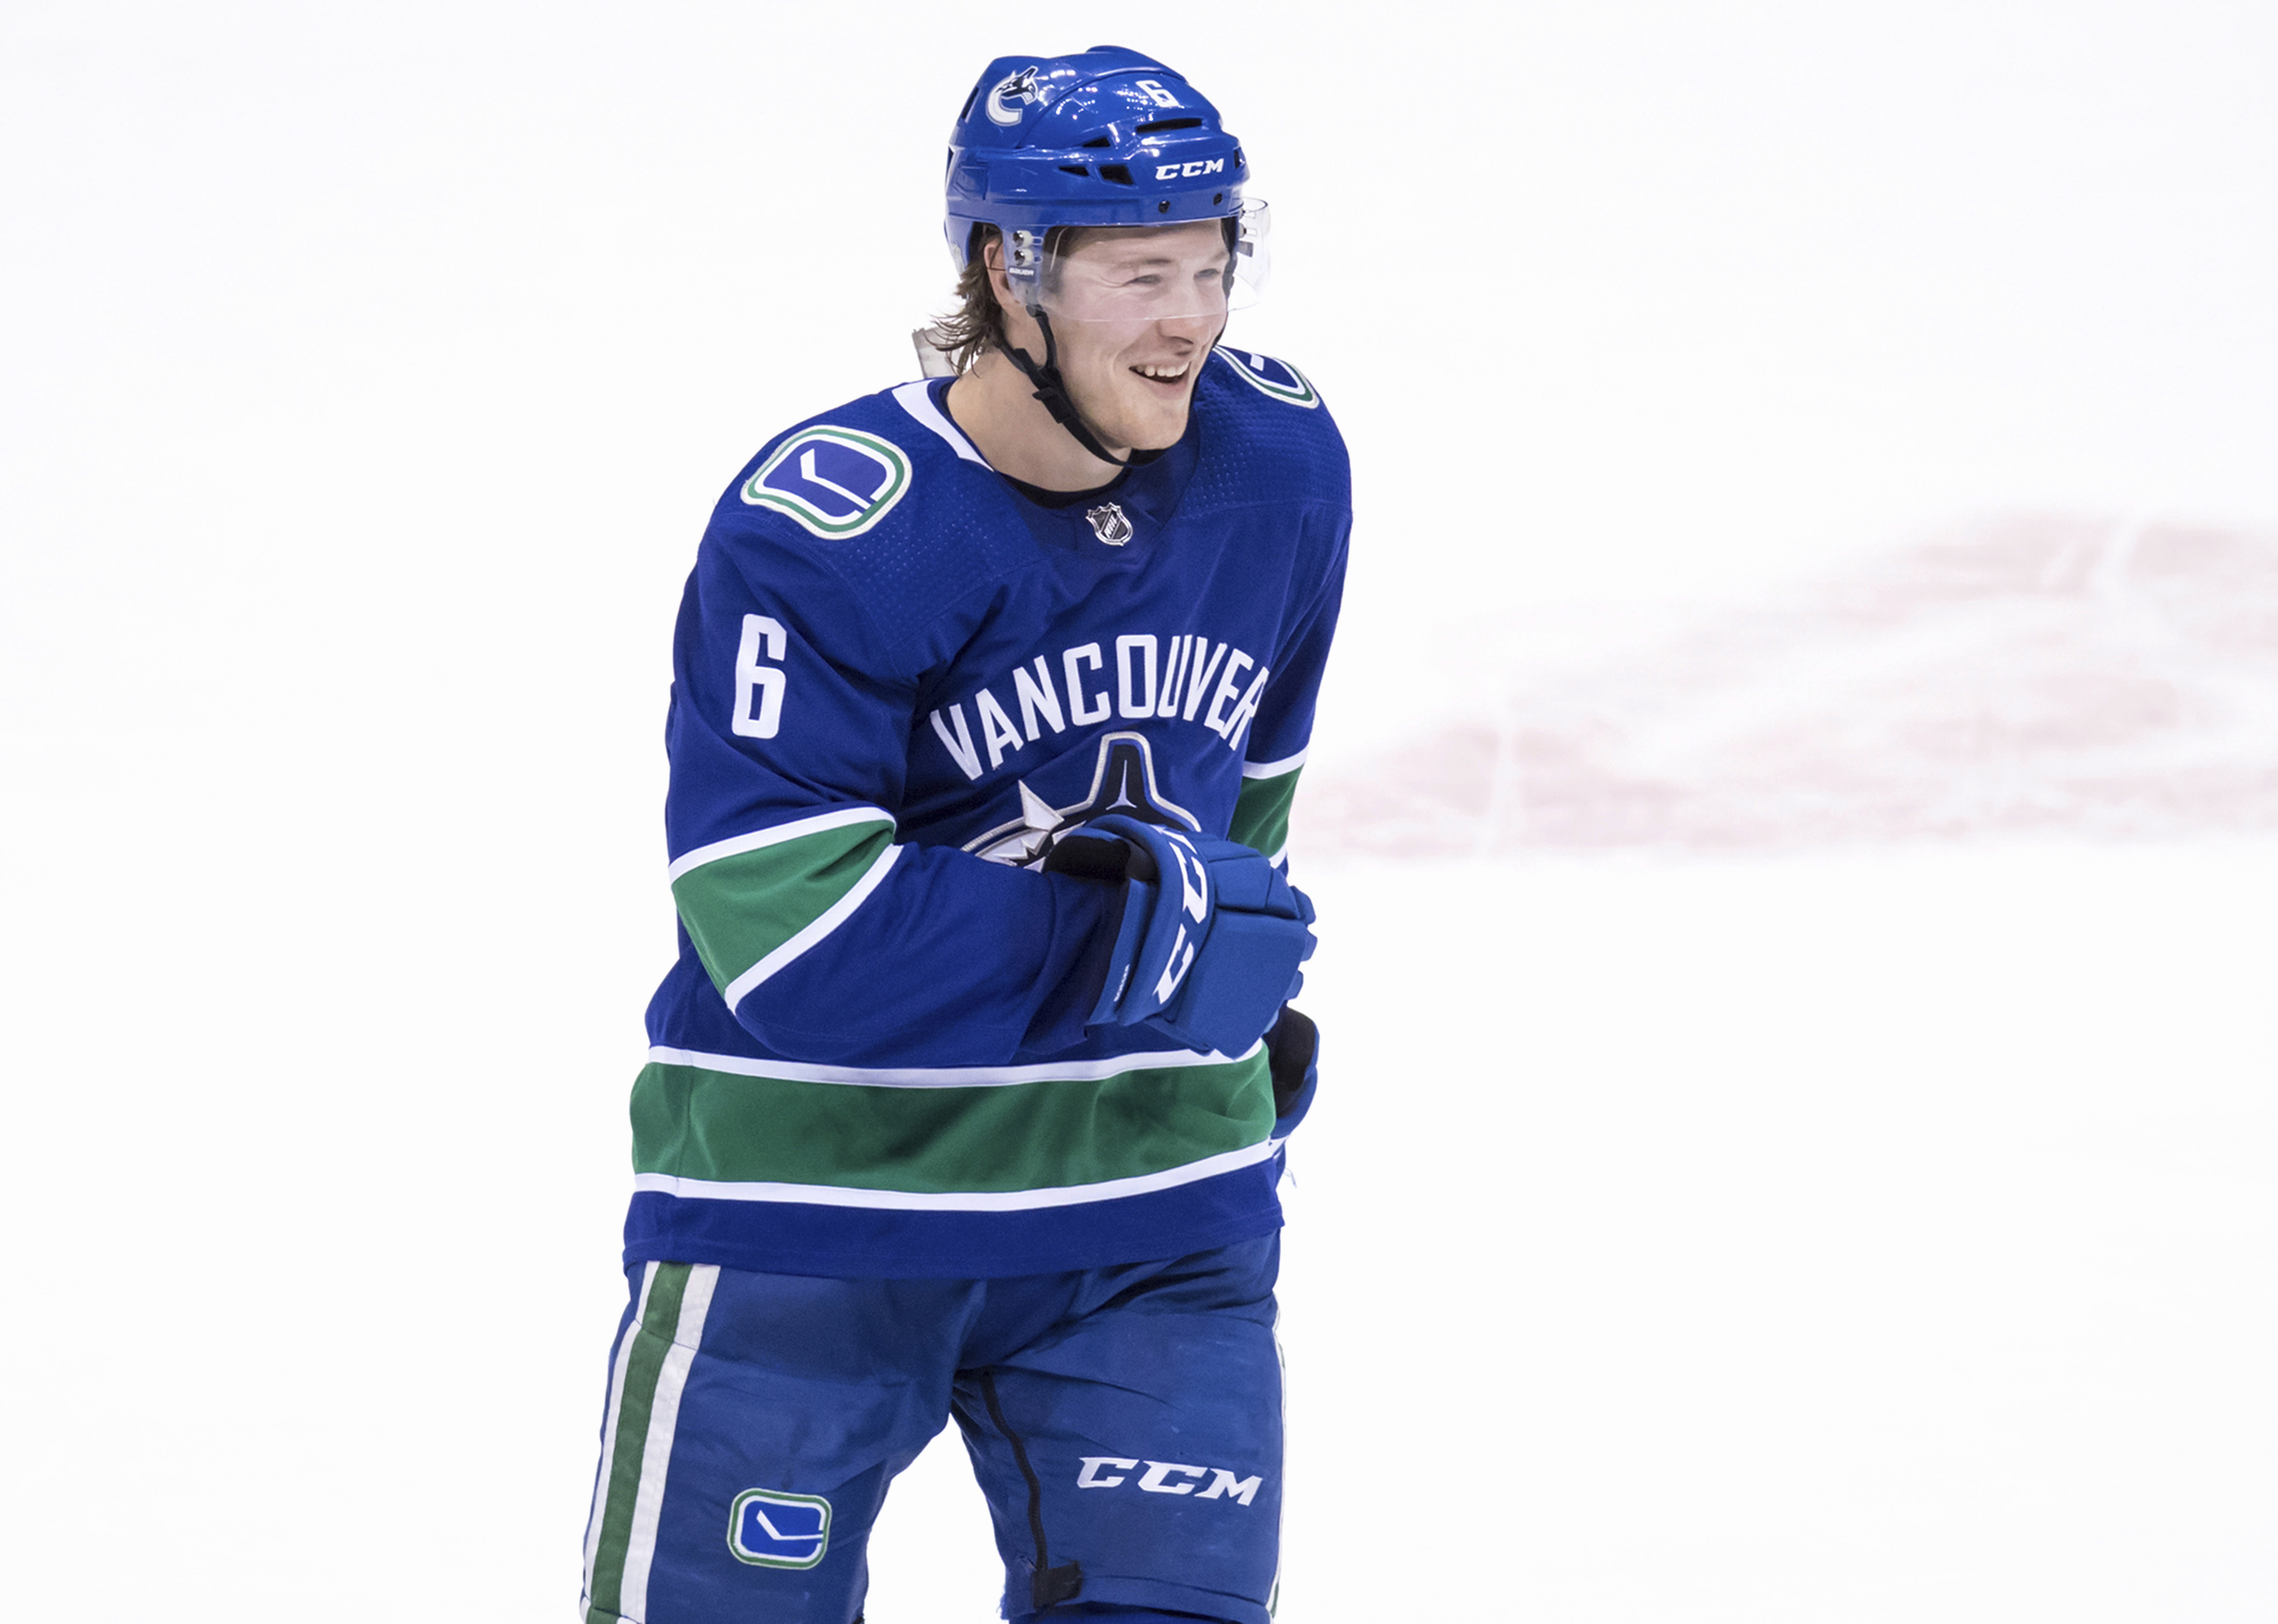 Boeser leads Canucks to 5-1 win over slumping Flyers